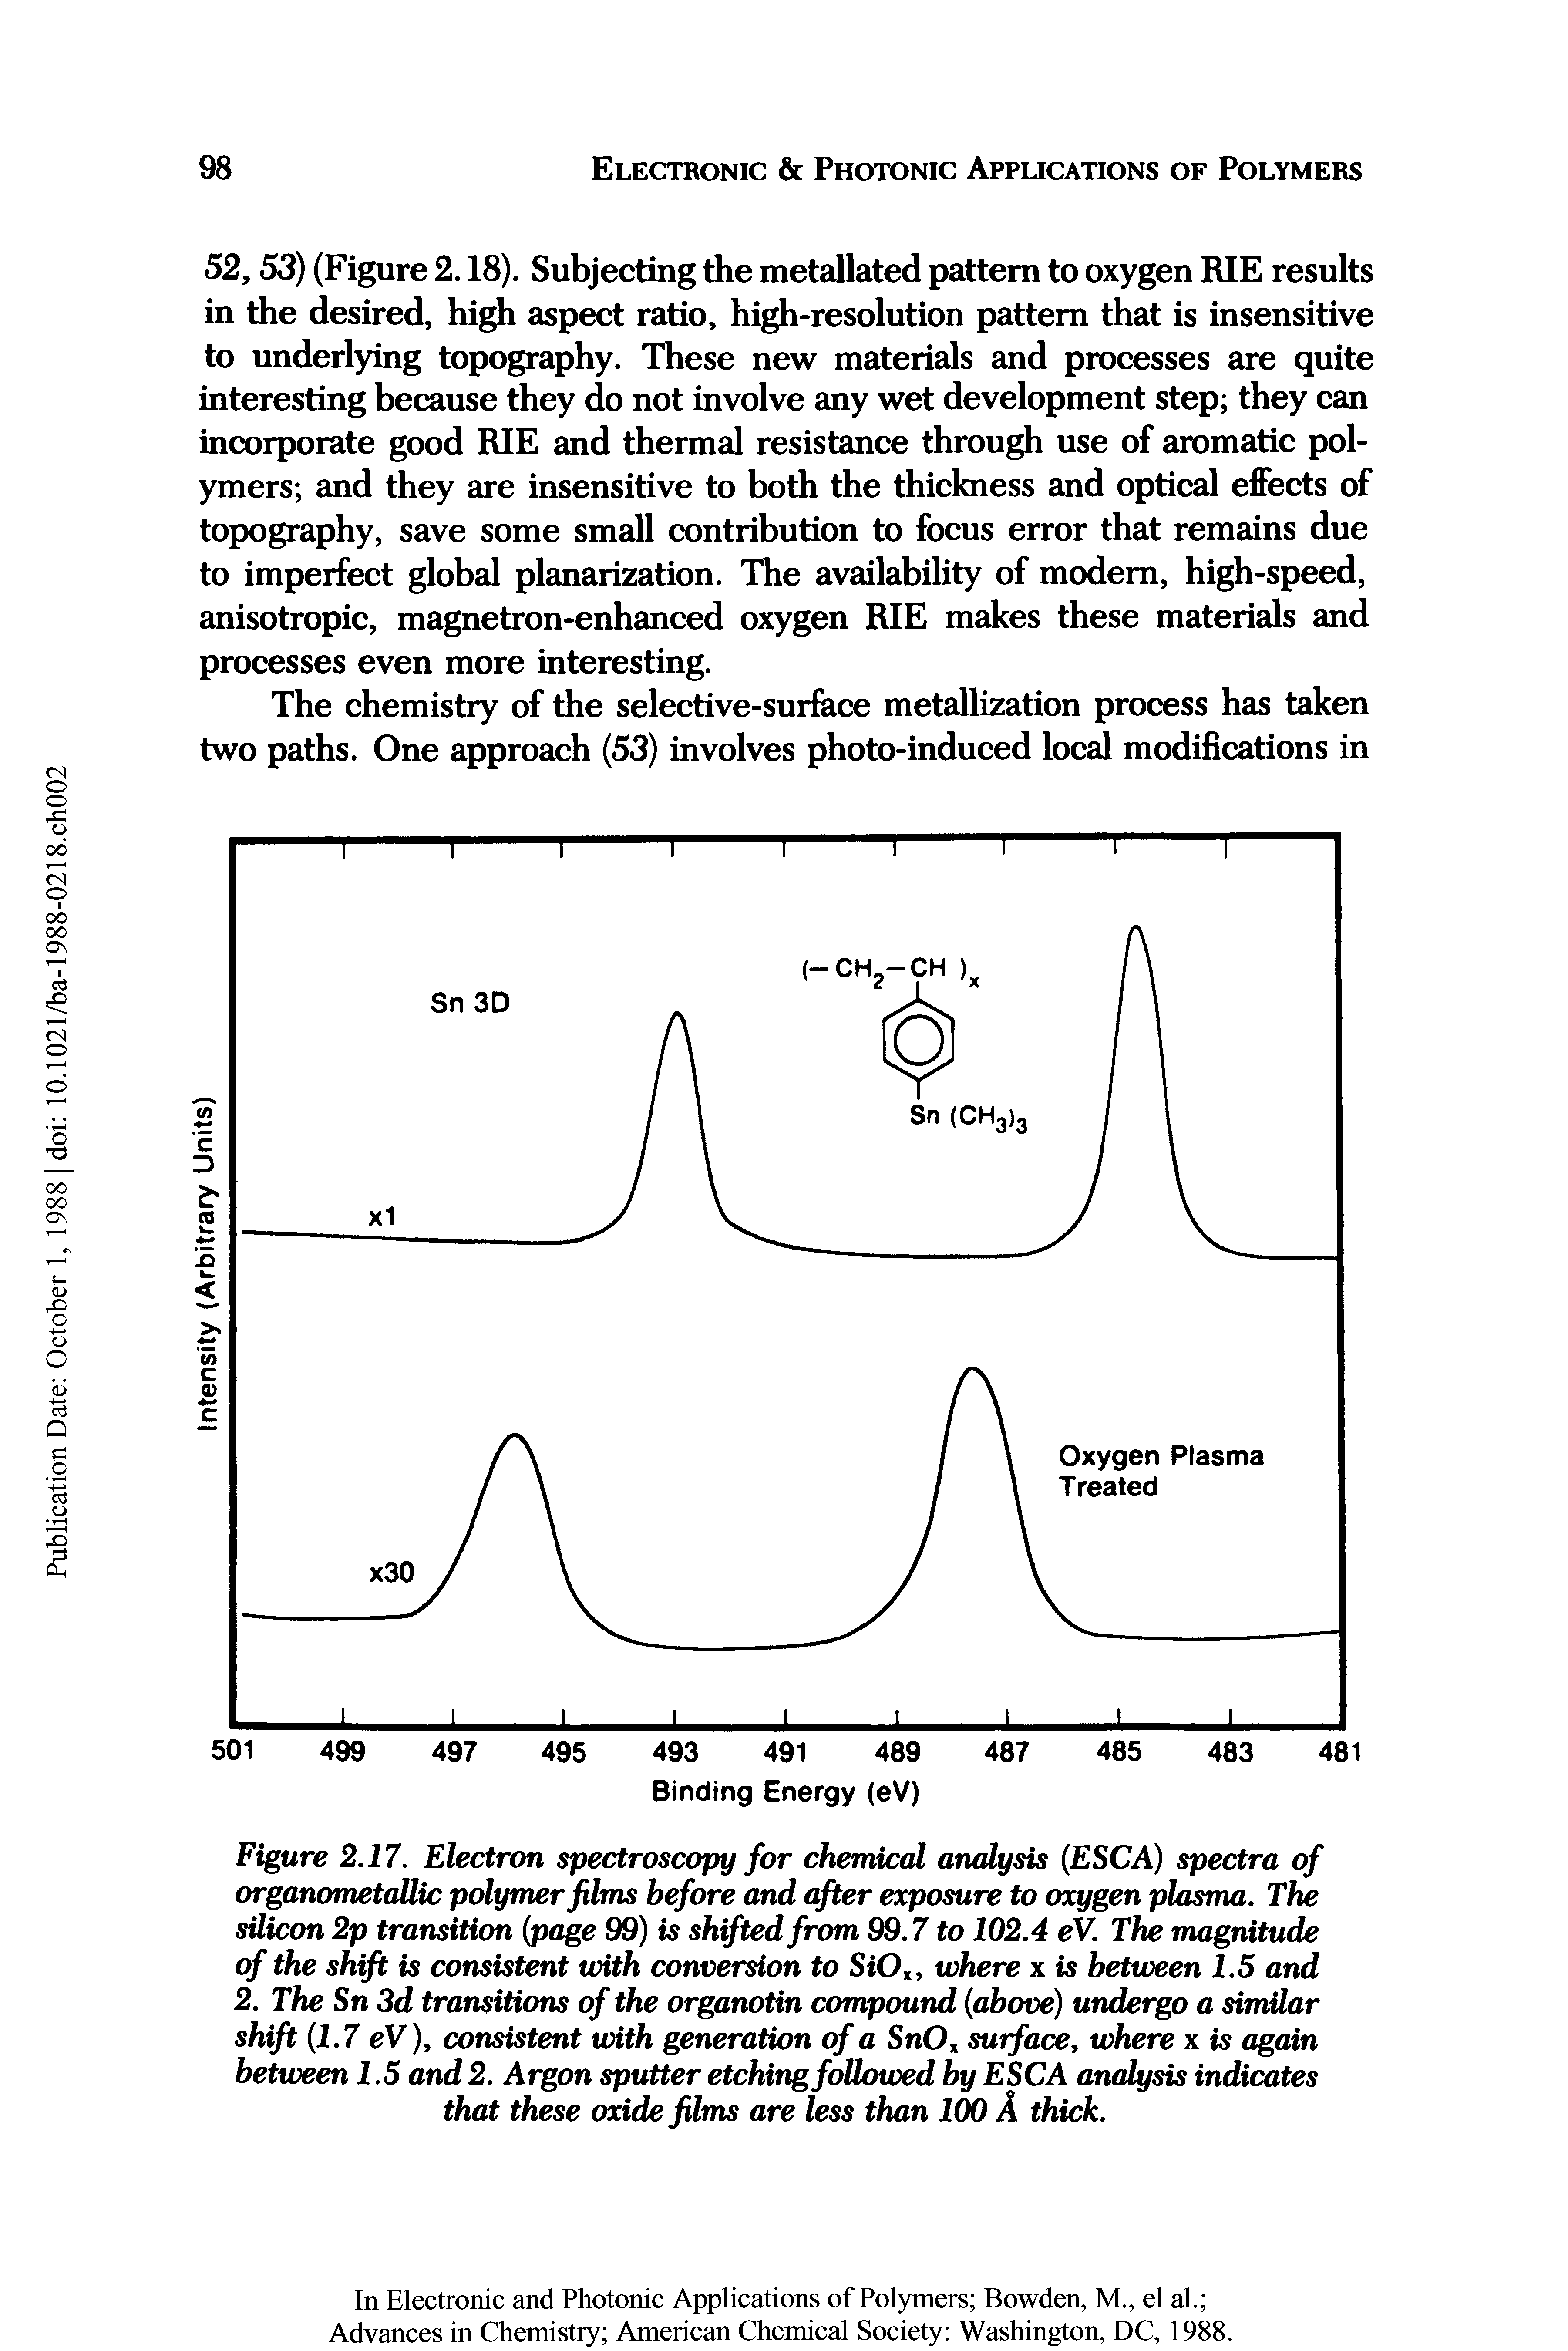 Figure 2.17. Electron spectroscopy for chemical analysis ESCA) spectra of organometallic polymer films before and after exposure to oxygen plasma. The silicon 2p transition page 99) is shifted from 99.7 to 102.4 eV. The magnitude of the shift is consistent uMh conversion to SiO, where x is between 1.5 and 2. The Sn 3d transitions of the organotin compound above) undergo a similar shift 1.7 eV), consistent with generation of a SnOx surface, where x is again between 1.5 and 2. Argon sputter etching followed by ESCA analysis indicates that these oxide films are less than 100 A thick.